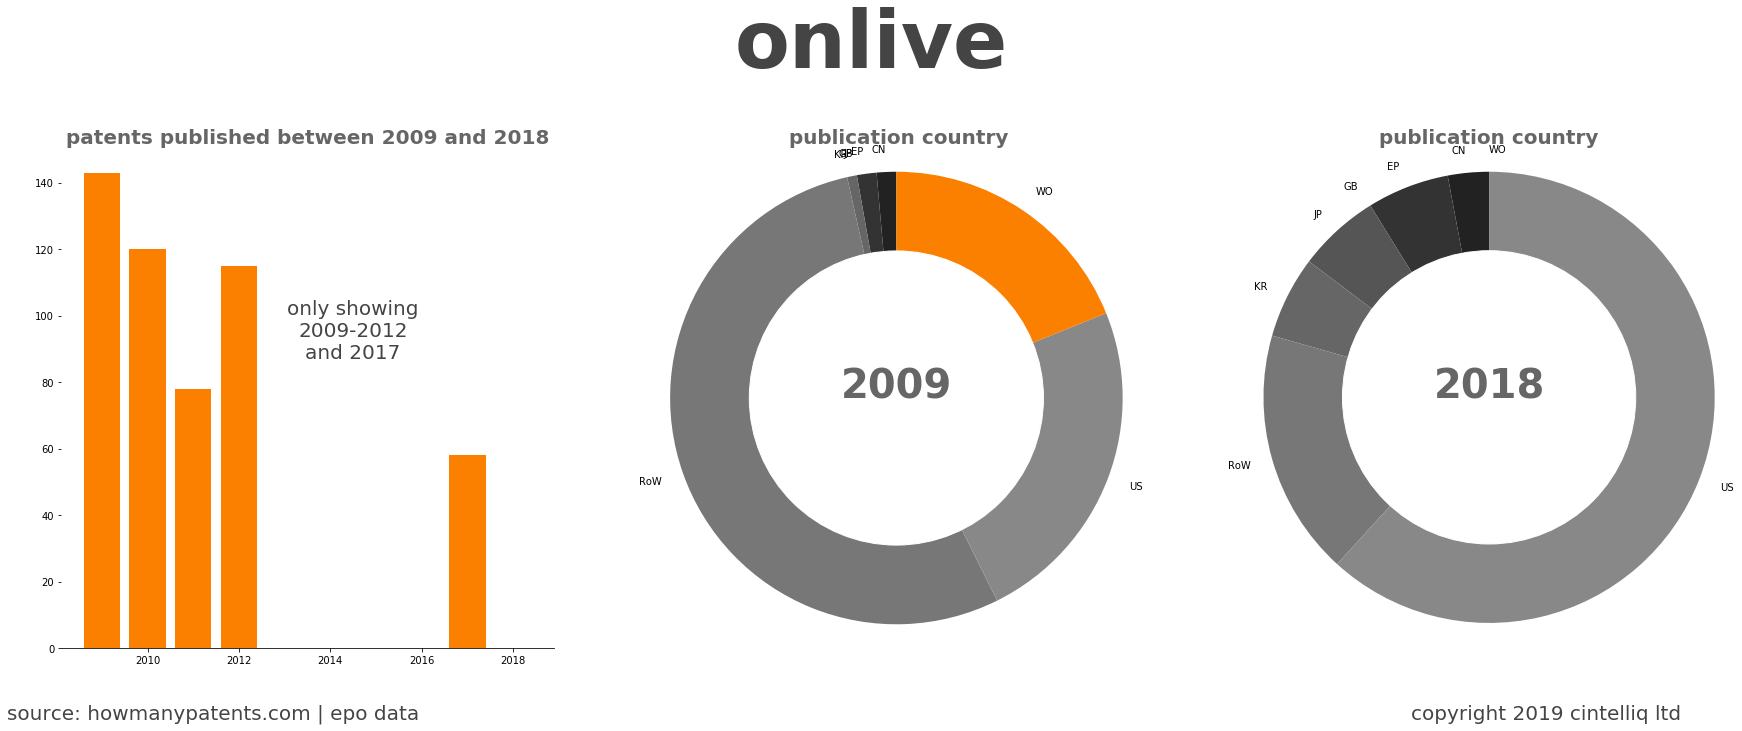 summary of patents for Onlive